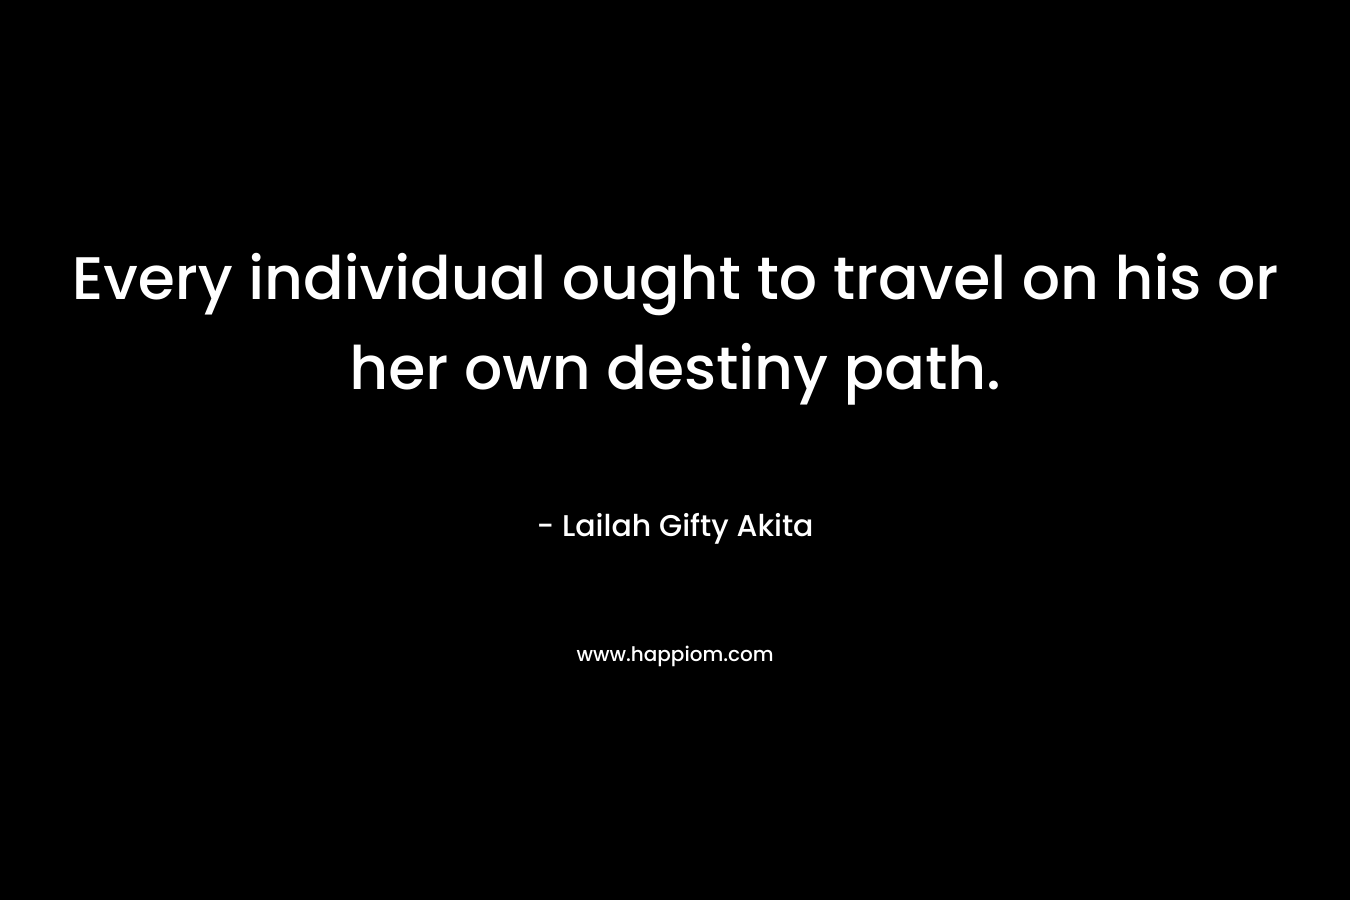 Every individual ought to travel on his or her own destiny path.